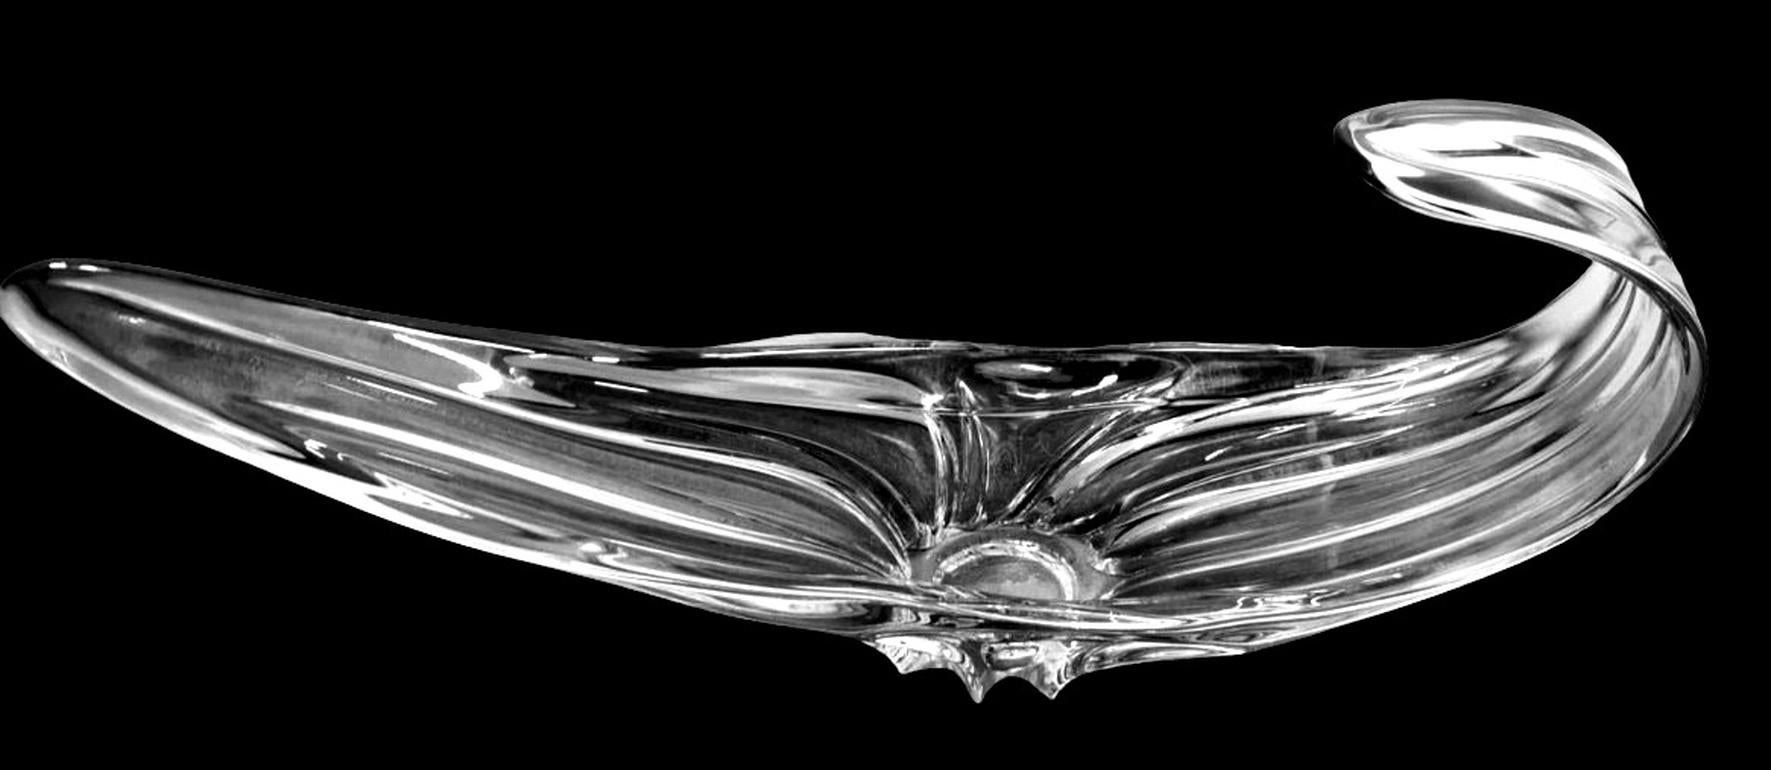 Mid-Century Modern Vannes-le-chatel Cristalleries Style French Lead Crystal Centerpiece For Sale